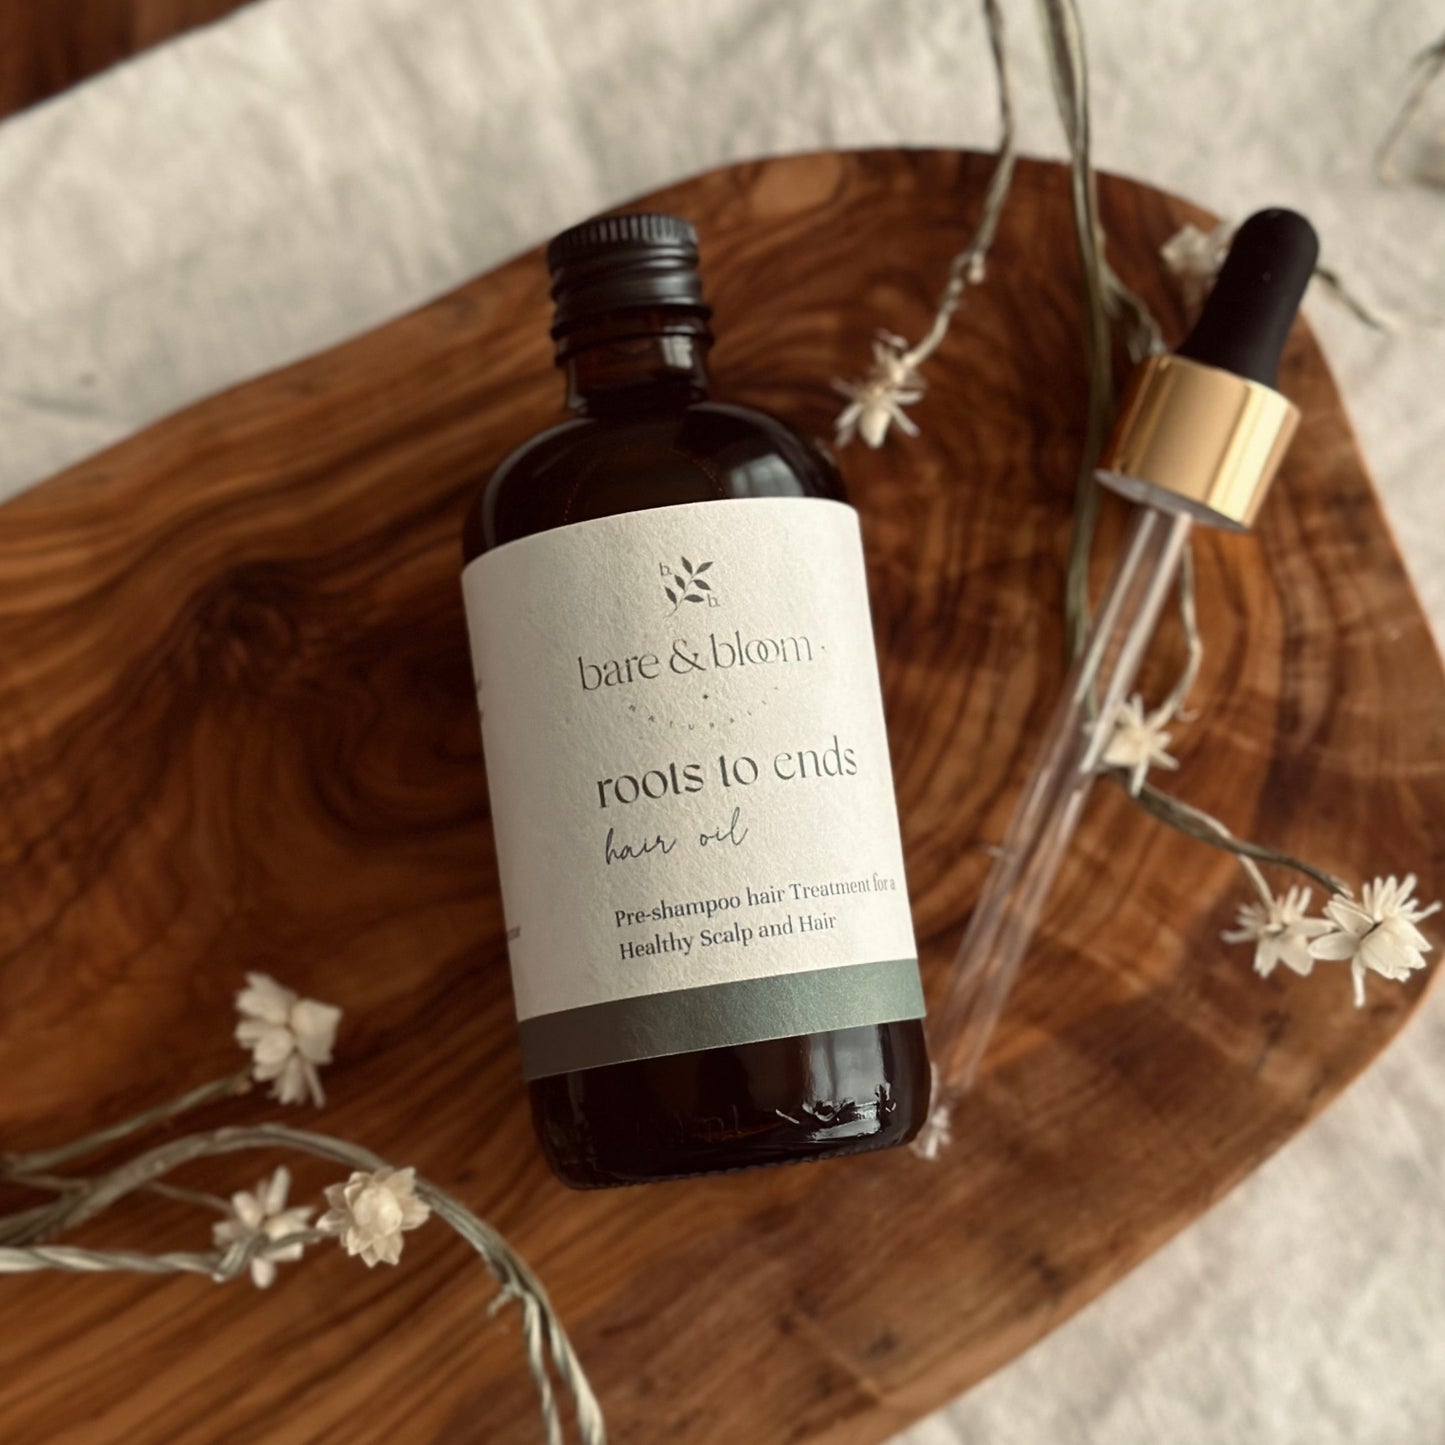 Roots to Ends Botanical Hair Oil